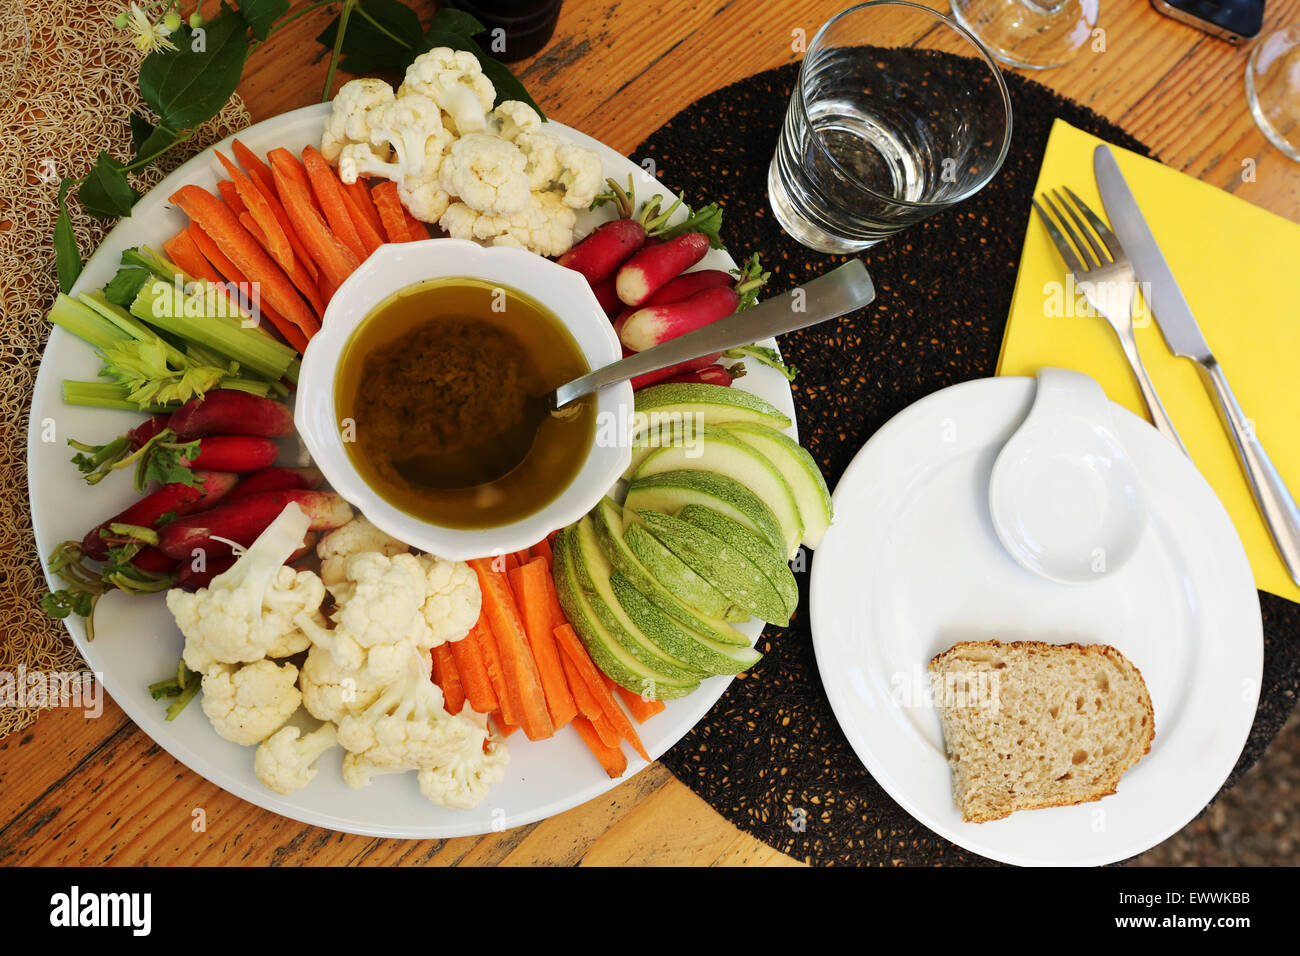 Vegetables served with an olive oil based dipping sauce at Corconne, France. The ingredients are locally sourced. Stock Photo